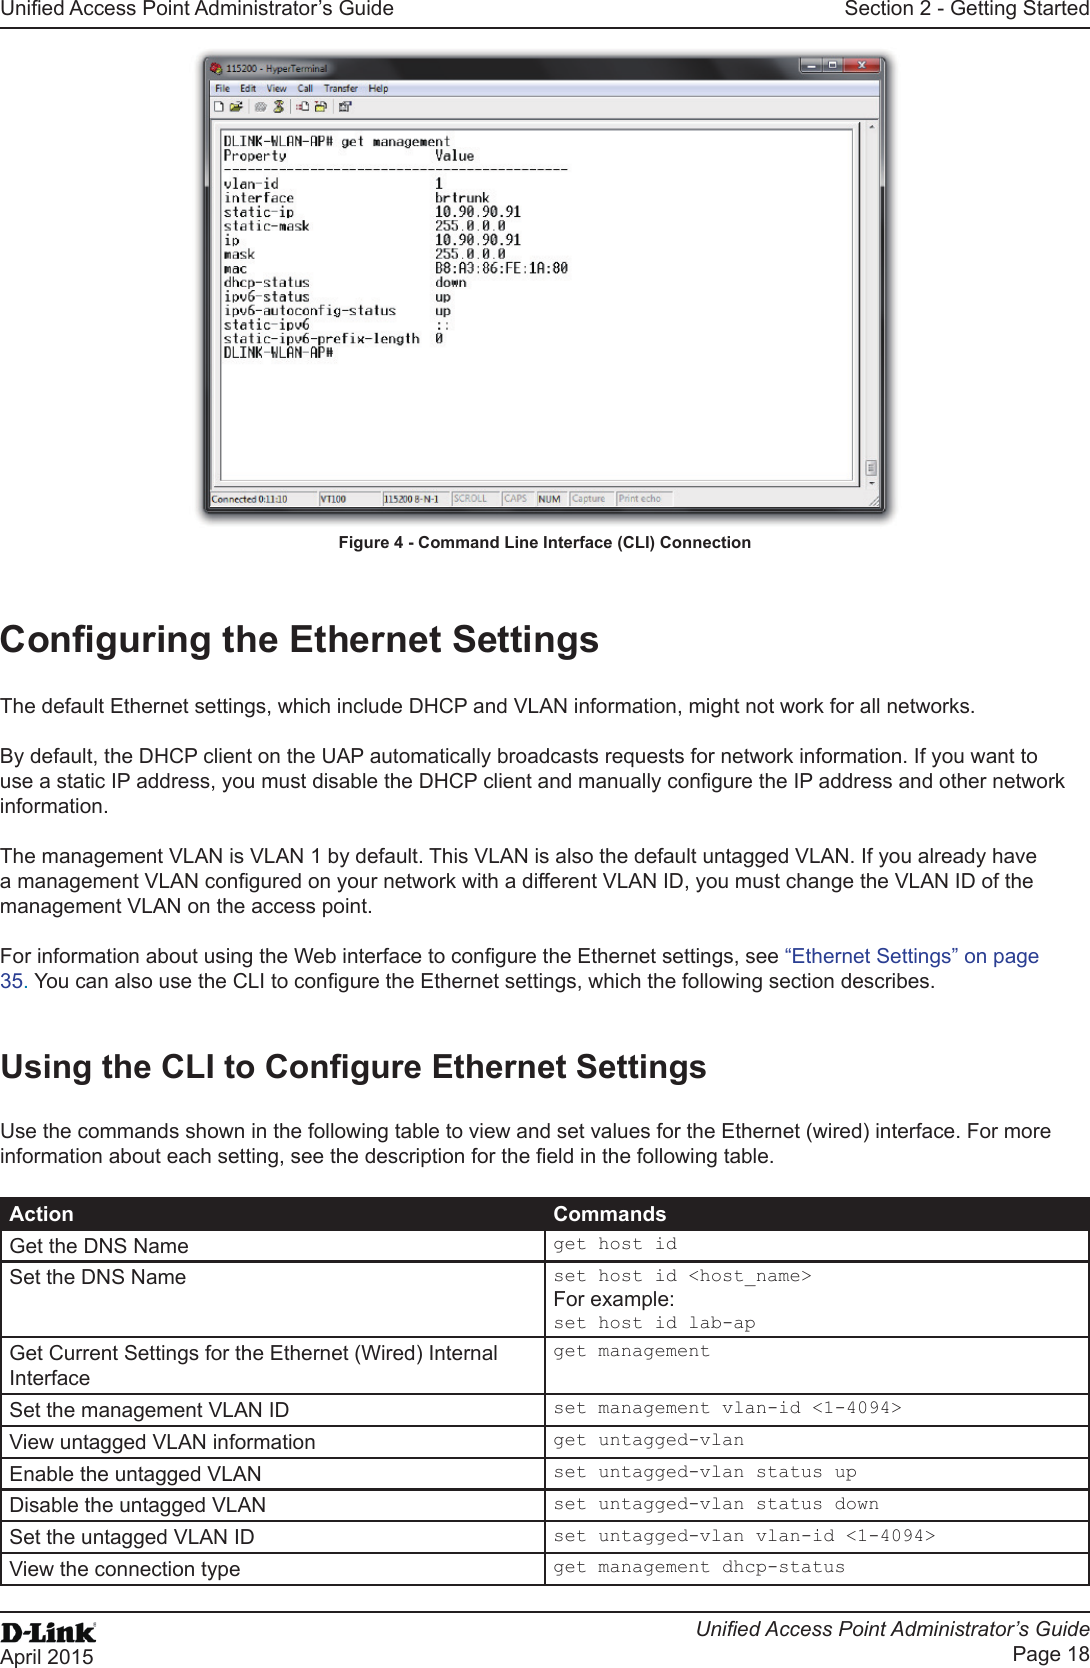 Unied Access Point Administrator’s GuideUnied Access Point Administrator’s GuidePage 18April 2015Section 2 - Getting StartedFigure 4 - Command Line Interface (CLI) ConnectionConguring the Ethernet SettingsThe default Ethernet settings, which include DHCP and VLAN information, might not work for all networks. By default, the DHCP client on the UAP automatically broadcasts requests for network information. If you want to use a static IP address, you must disable the DHCP client and manually congure the IP address and other network information.The management VLAN is VLAN 1 by default. This VLAN is also the default untagged VLAN. If you already have a management VLAN congured on your network with a different VLAN ID, you must change the VLAN ID of the management VLAN on the access point. For information about using the Web interface to congure the Ethernet settings, see “Ethernet Settings” on page 35. You can also use the CLI to congure the Ethernet settings, which the following section describes.Using the CLI to Congure Ethernet SettingsUse the commands shown in the following table to view and set values for the Ethernet (wired) interface. For more information about each setting, see the description for the eld in the following table.Action CommandsGet the DNS Name get host idSet the DNS Name set host id &lt;host_name&gt;For example:set host id lab-apGet Current Settings for the Ethernet (Wired) Internal Interfaceget managementSet the management VLAN ID set management vlan-id &lt;1-4094&gt;View untagged VLAN information get untagged-vlanEnable the untagged VLAN set untagged-vlan status upDisable the untagged VLAN set untagged-vlan status downSet the untagged VLAN ID set untagged-vlan vlan-id &lt;1-4094&gt;View the connection type get management dhcp-status